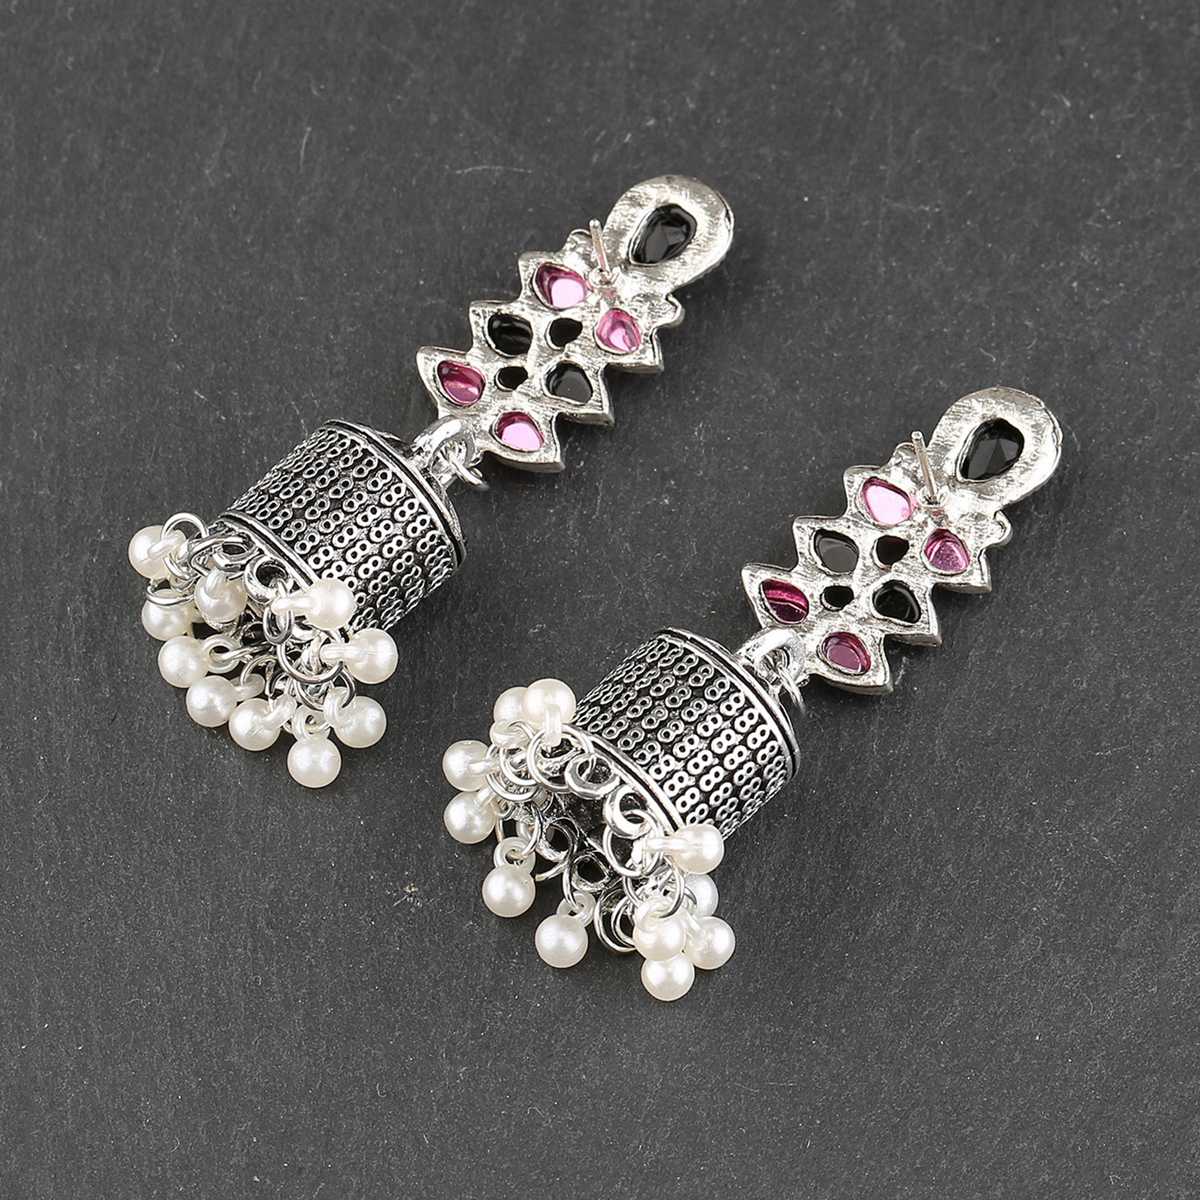 Ethnic-Silver-Color-Bell-Indian-Earrings-For-Women-Pendient-Vintage-Gyspy-CZ-Leaf-Ladies-Earring-Jew-1005003740209370-5